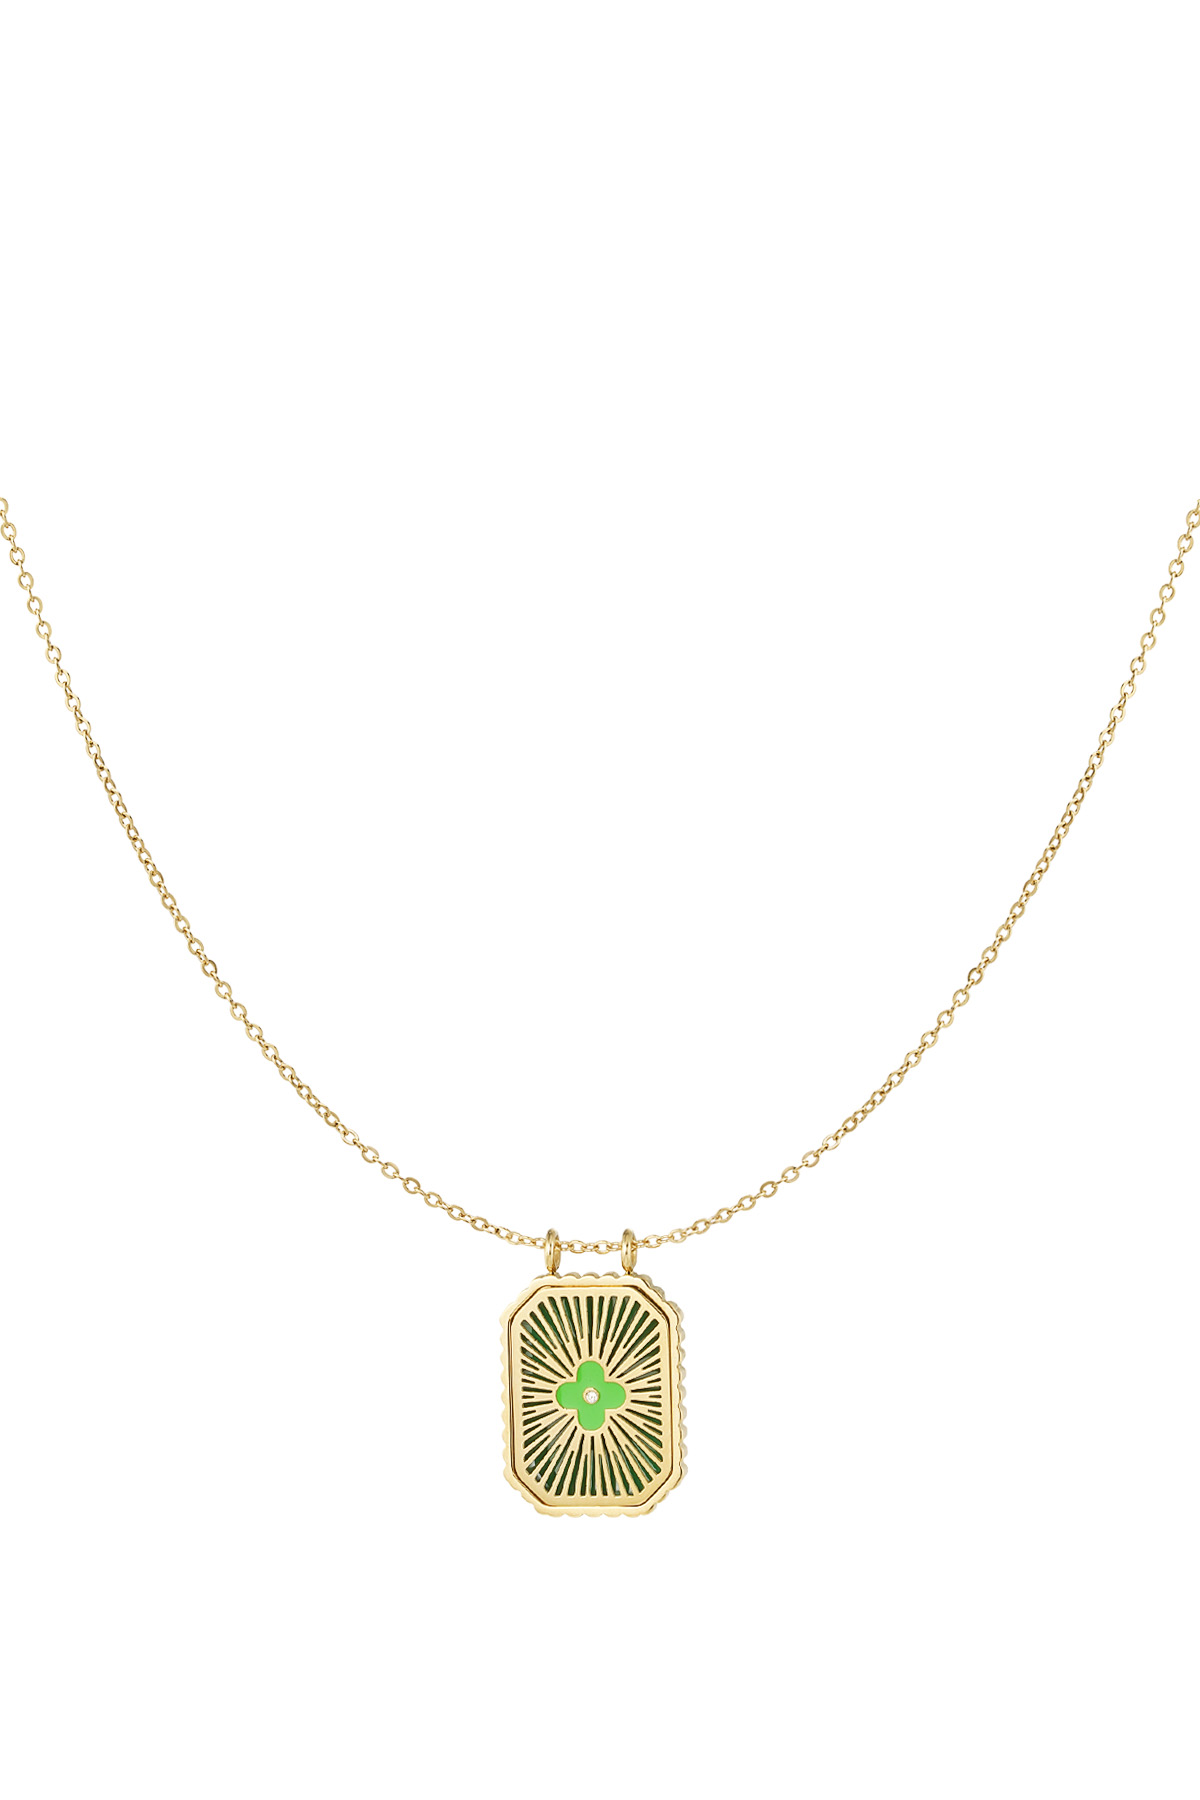 Necklace colored flower charm - green gold